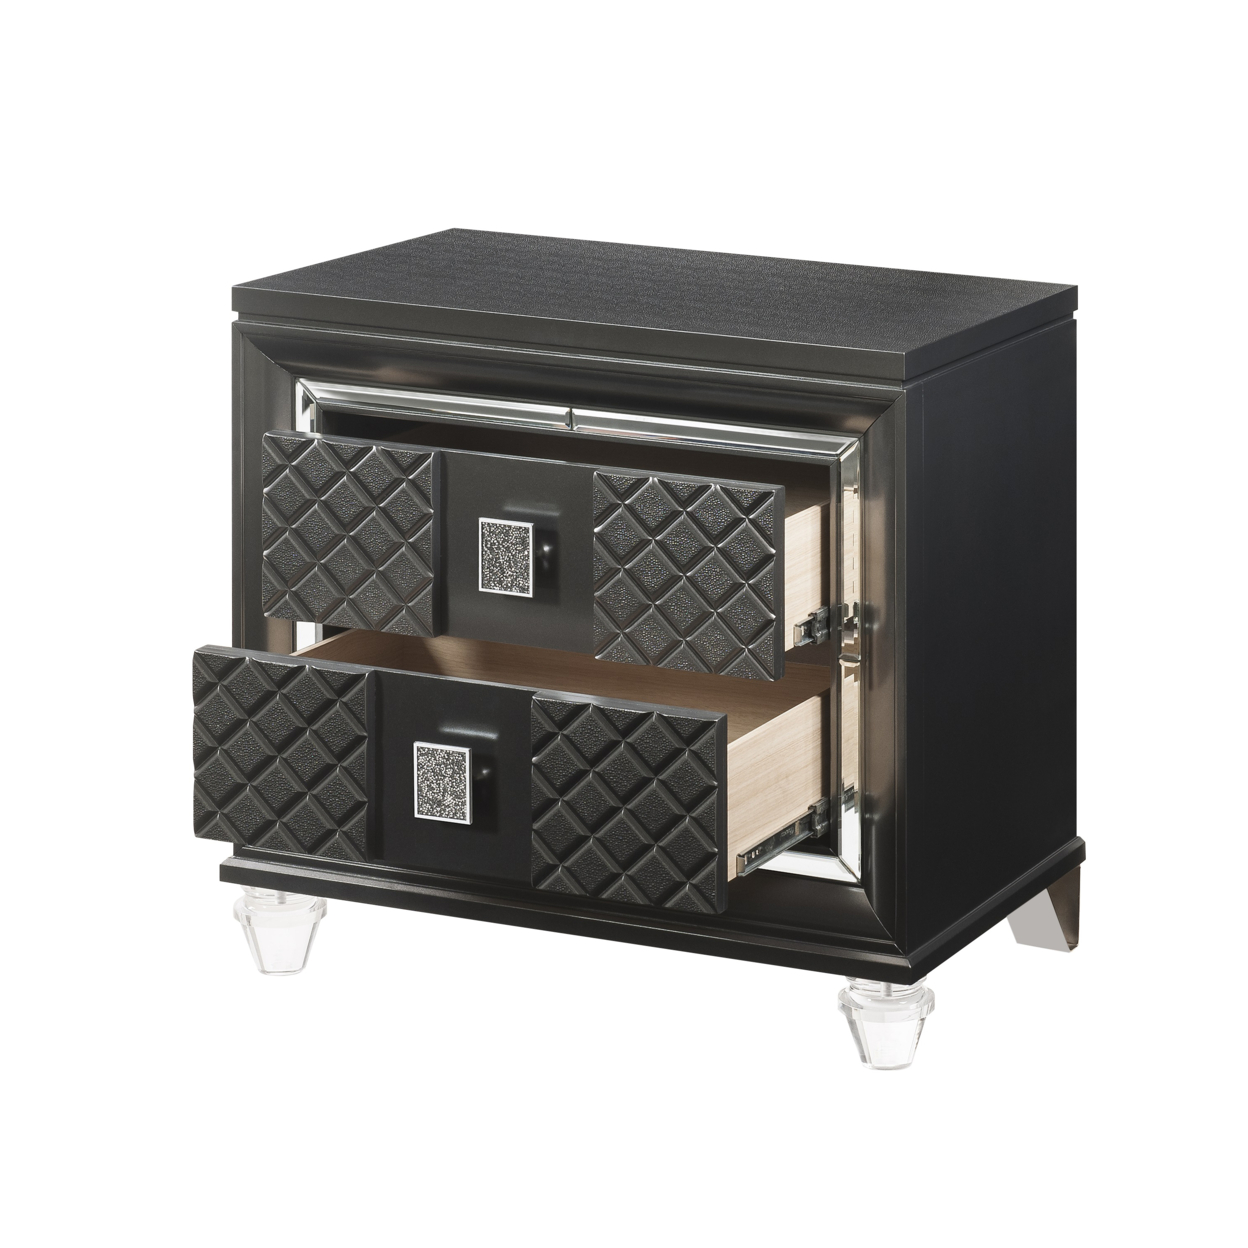 2 Drawer Wooden Nightstand With Mirror Accents And Diamond Pattern, Black- Saltoro Sherpi